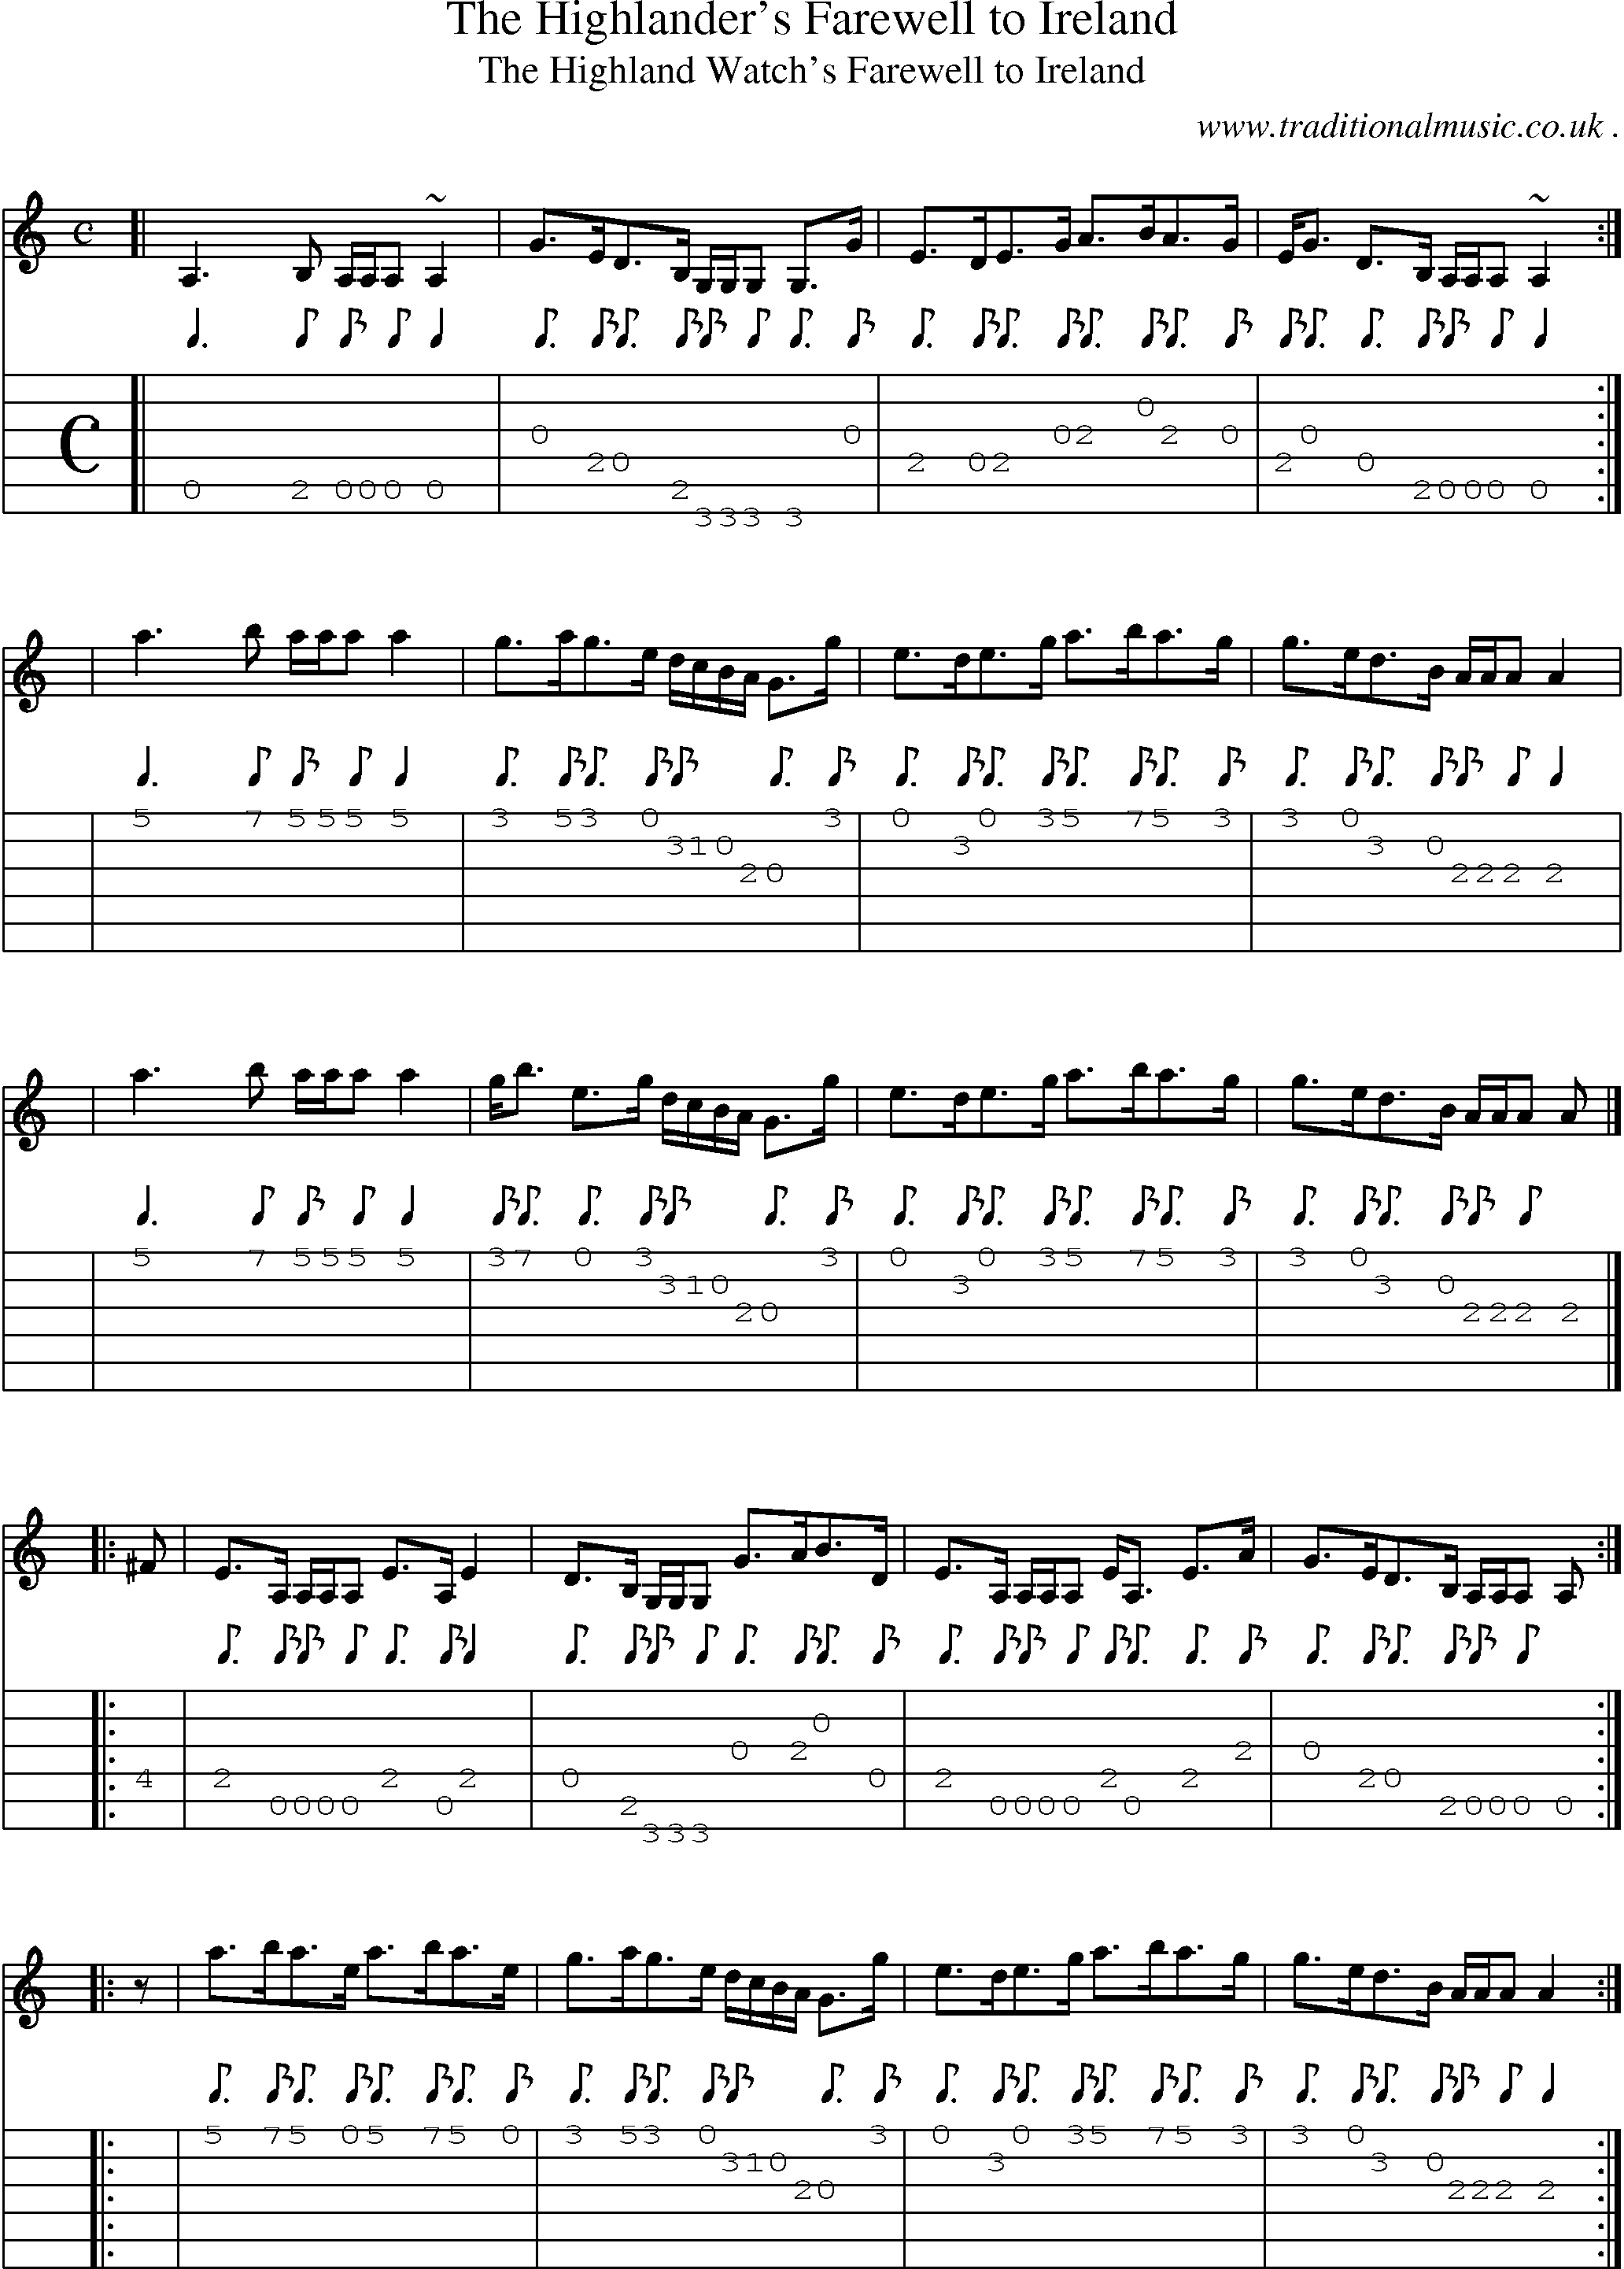 Sheet-music  score, Chords and Guitar Tabs for The Highlanders Farewell To Ireland1